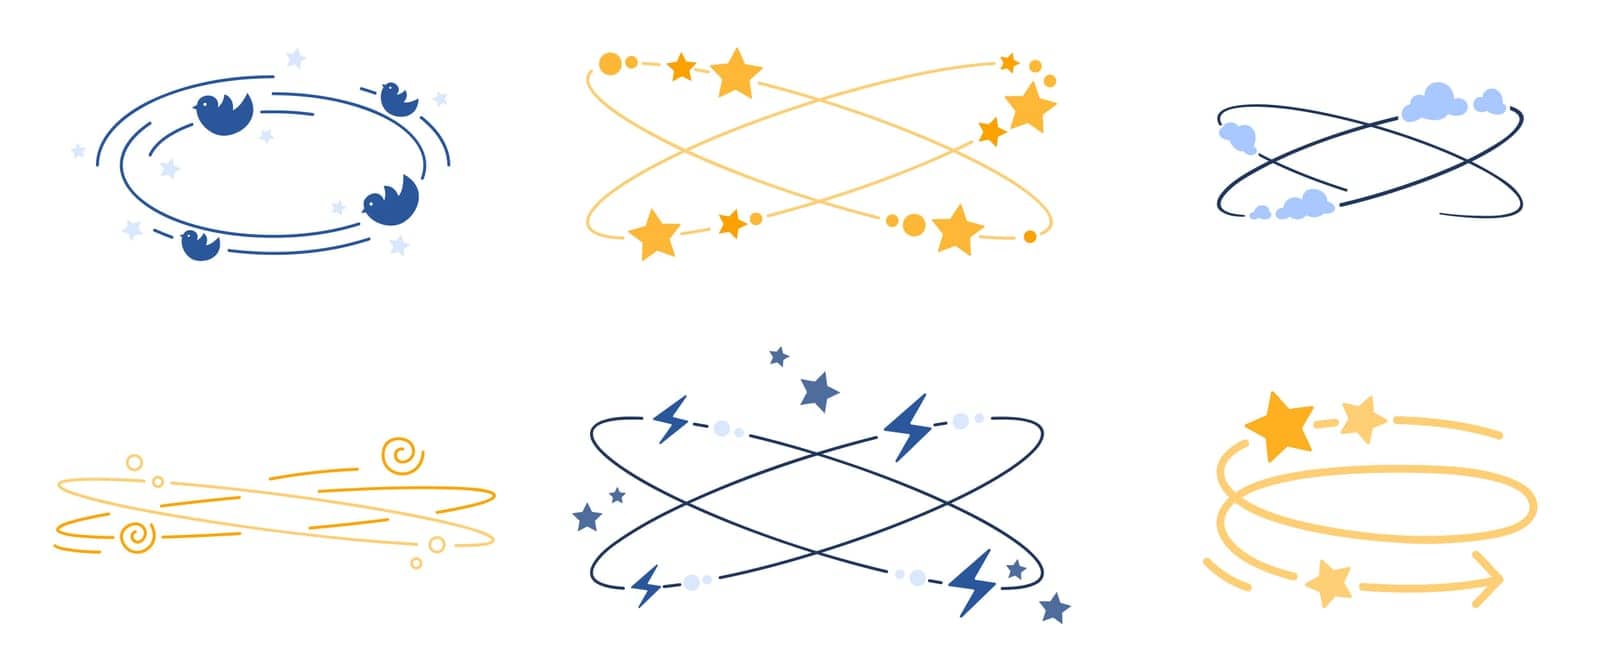 Dizzy line icons set, vertigo dizziness symbols collection with spinning stars and clouds by Popov